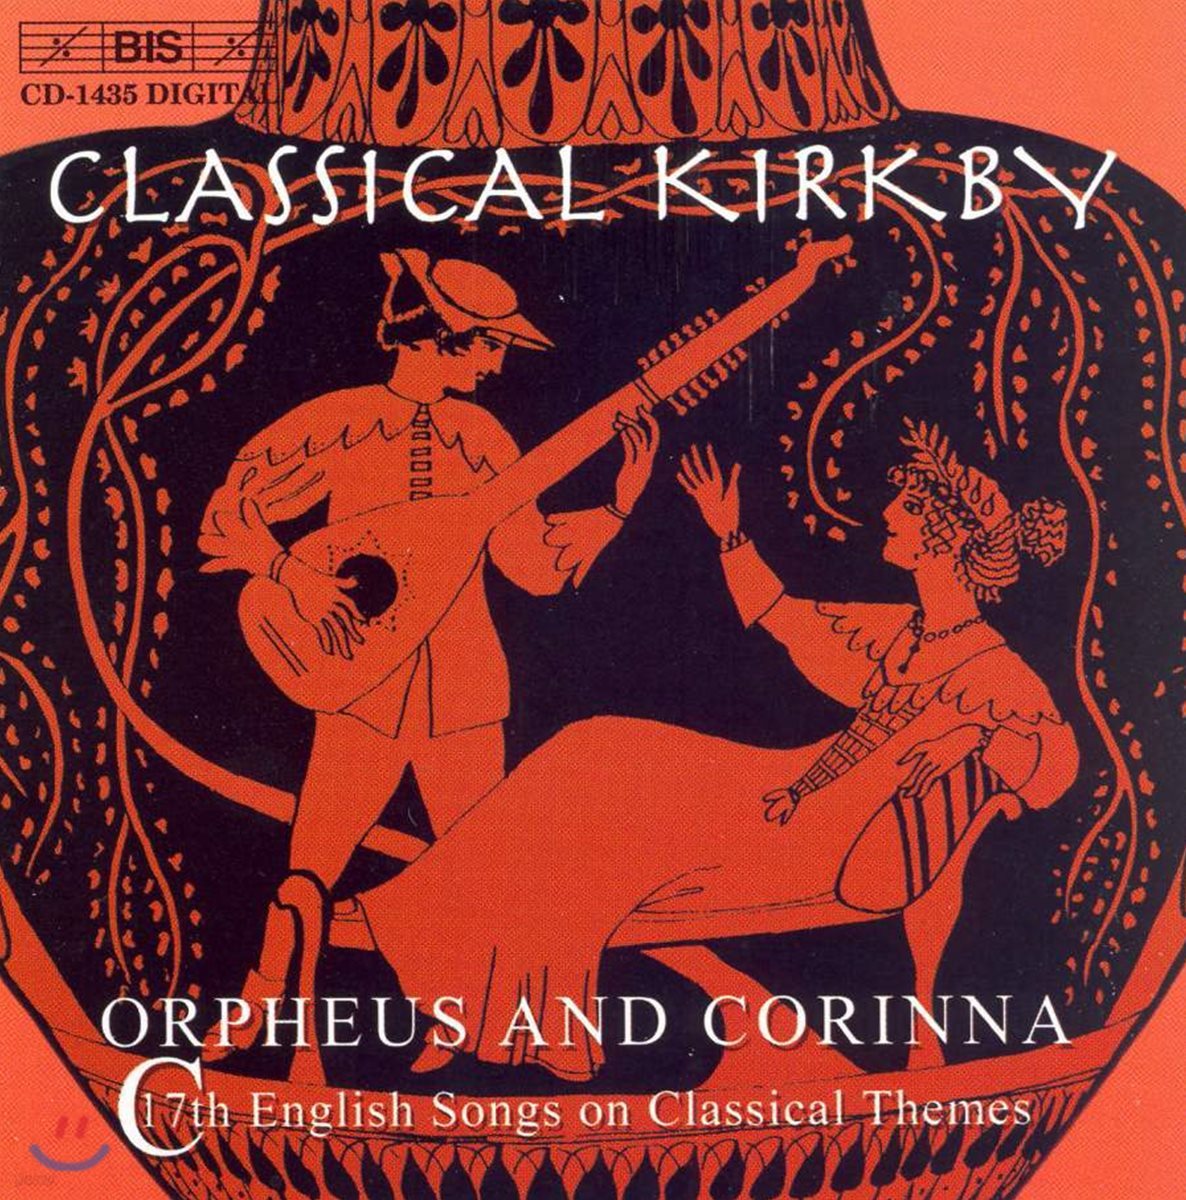 Emma Kirkby 17세기 영국 가곡집 (Classical Kirkby : Orpheus And Corinna)